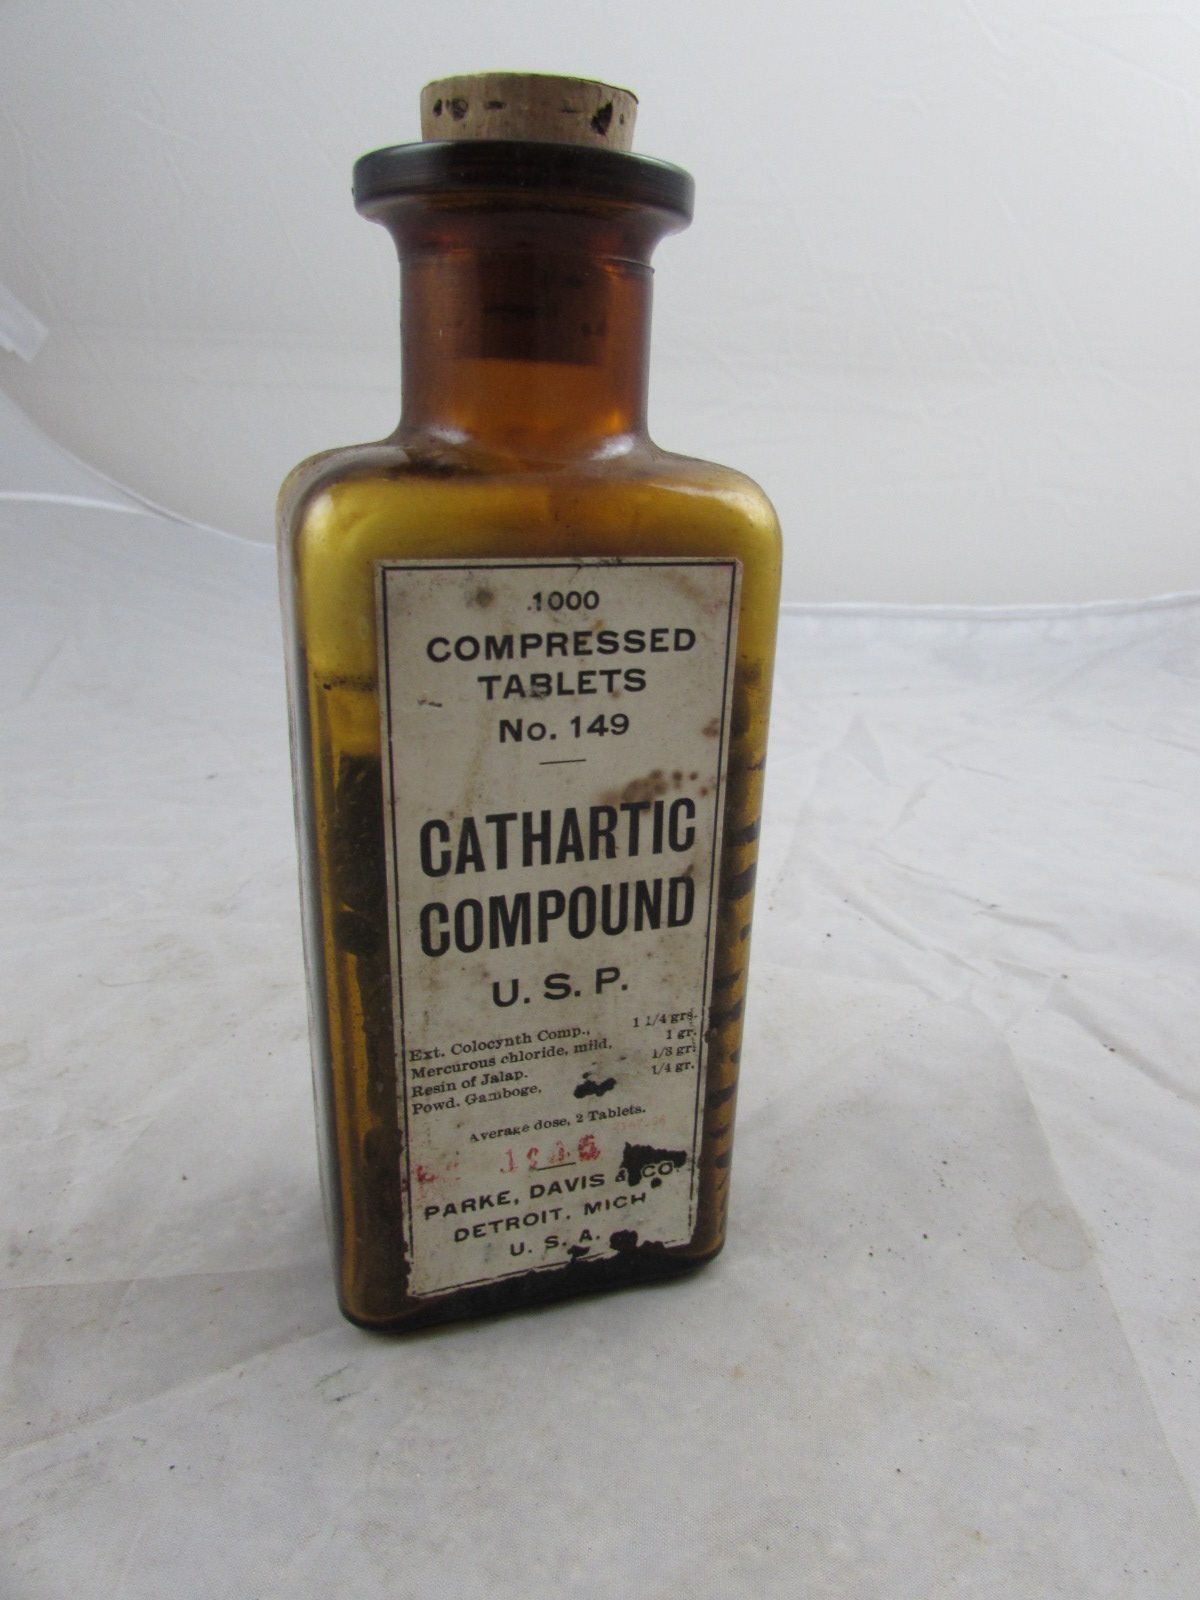 WW1 Bottle of Cathartic Compound,U.S.P